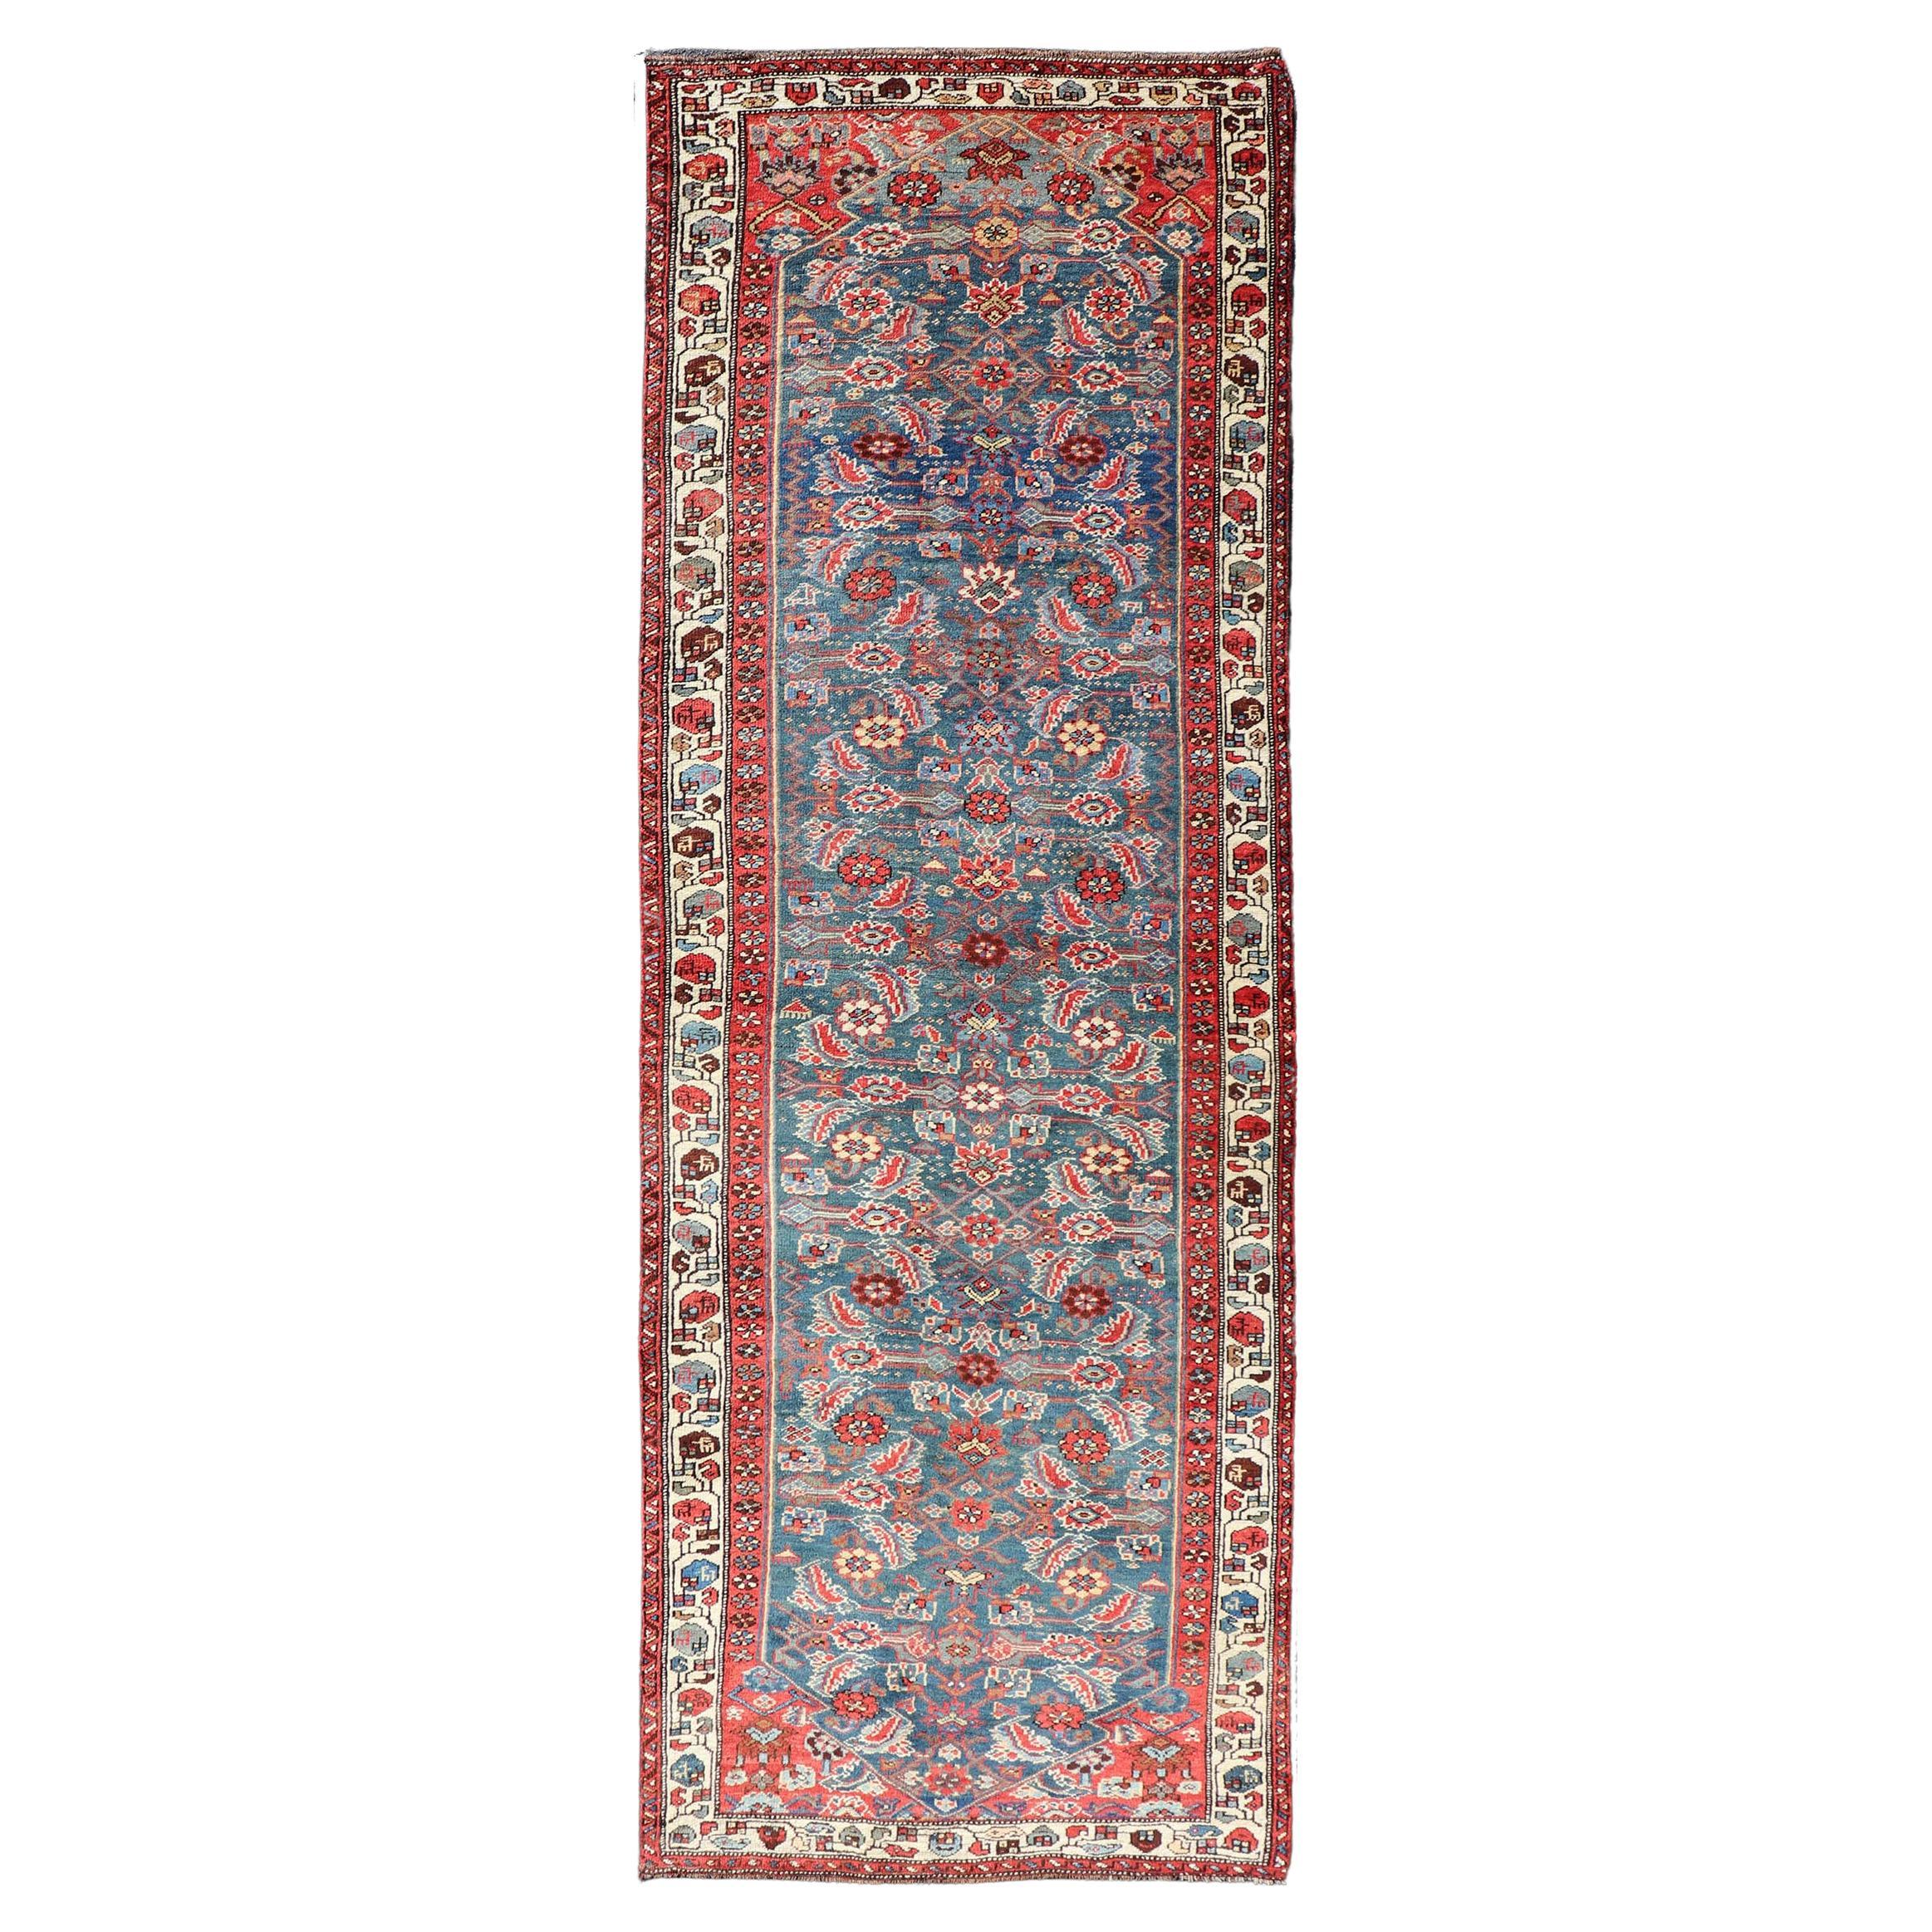 Antique Persian Bidjar Rug with Large Floral Motifs in Blue, Red, and Ivory